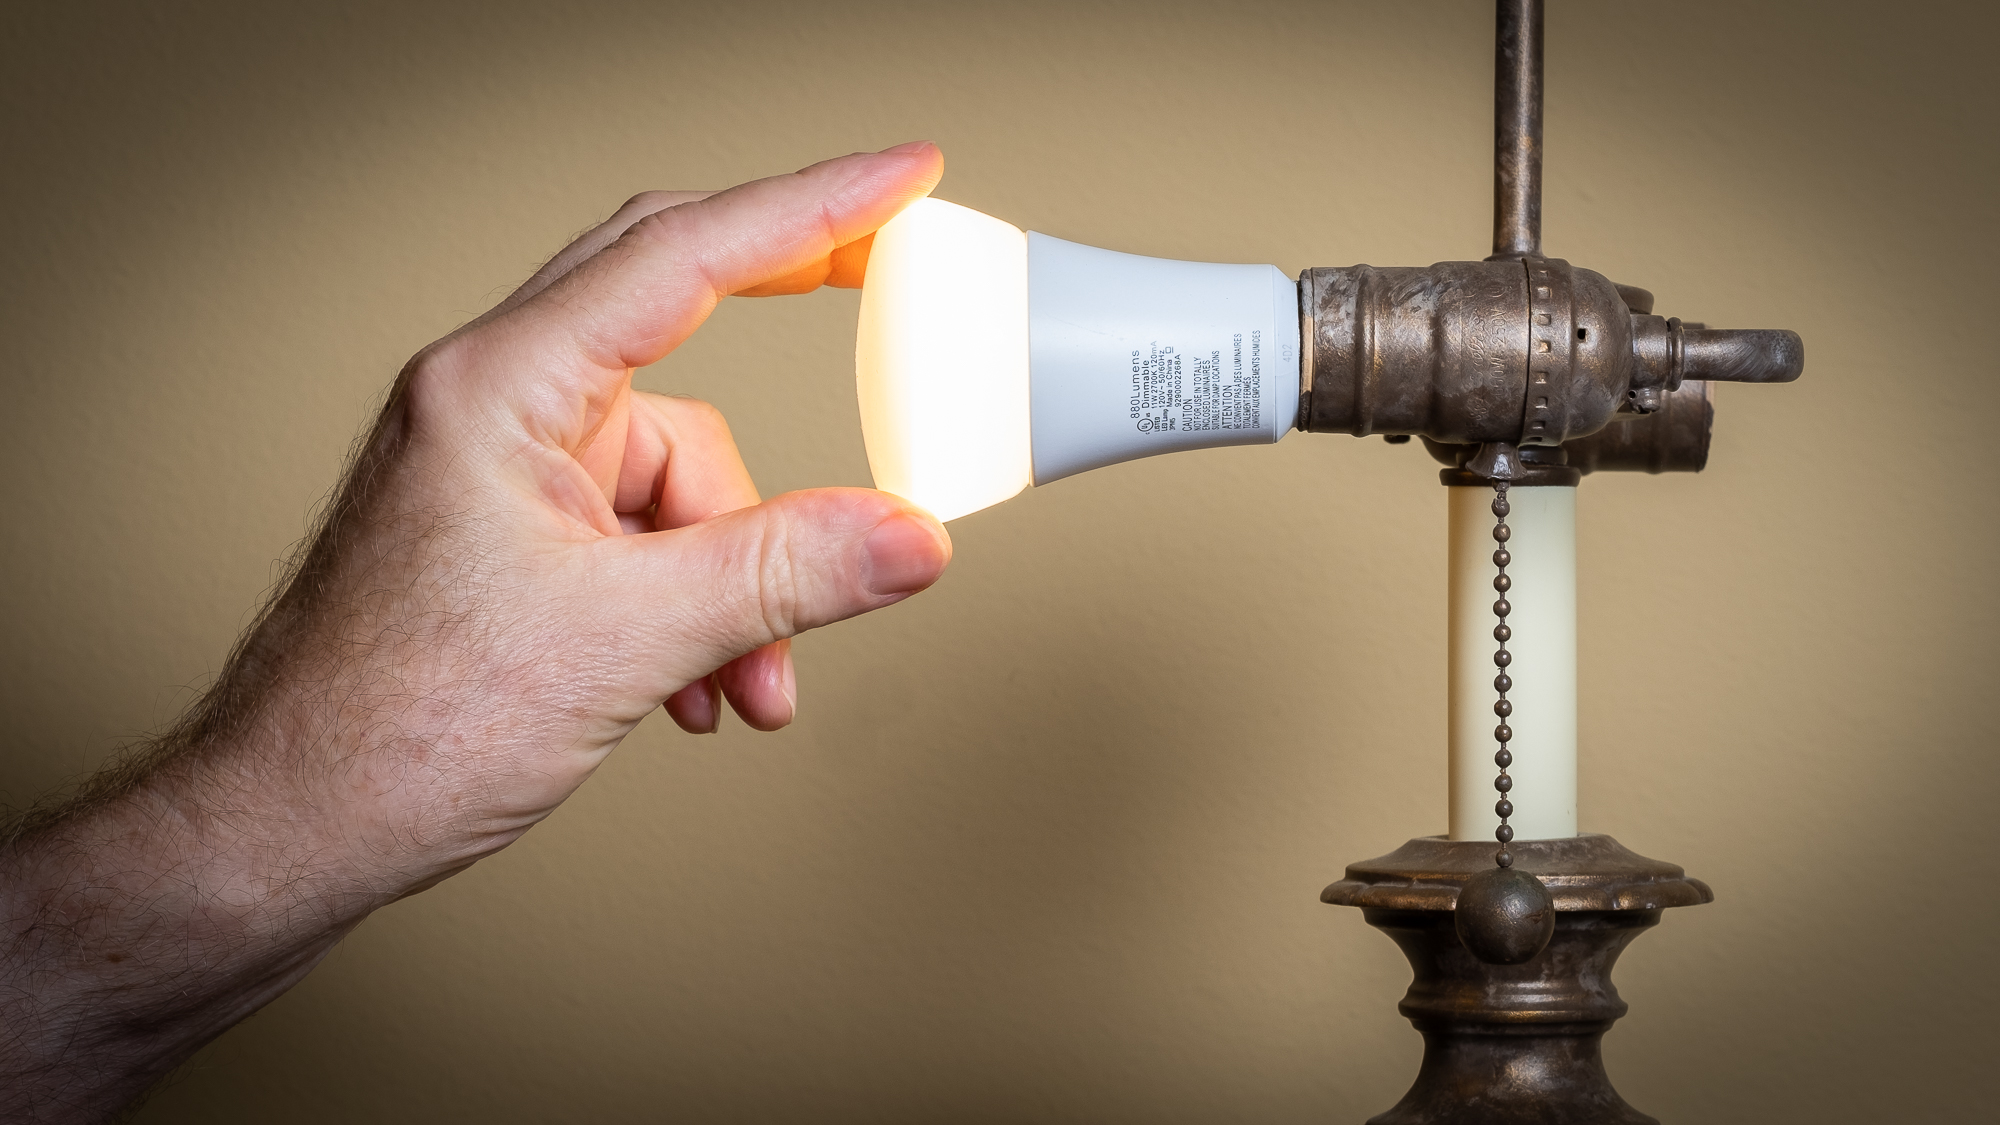 Installing LED light bulbs is a quick and easy way to save energy. 